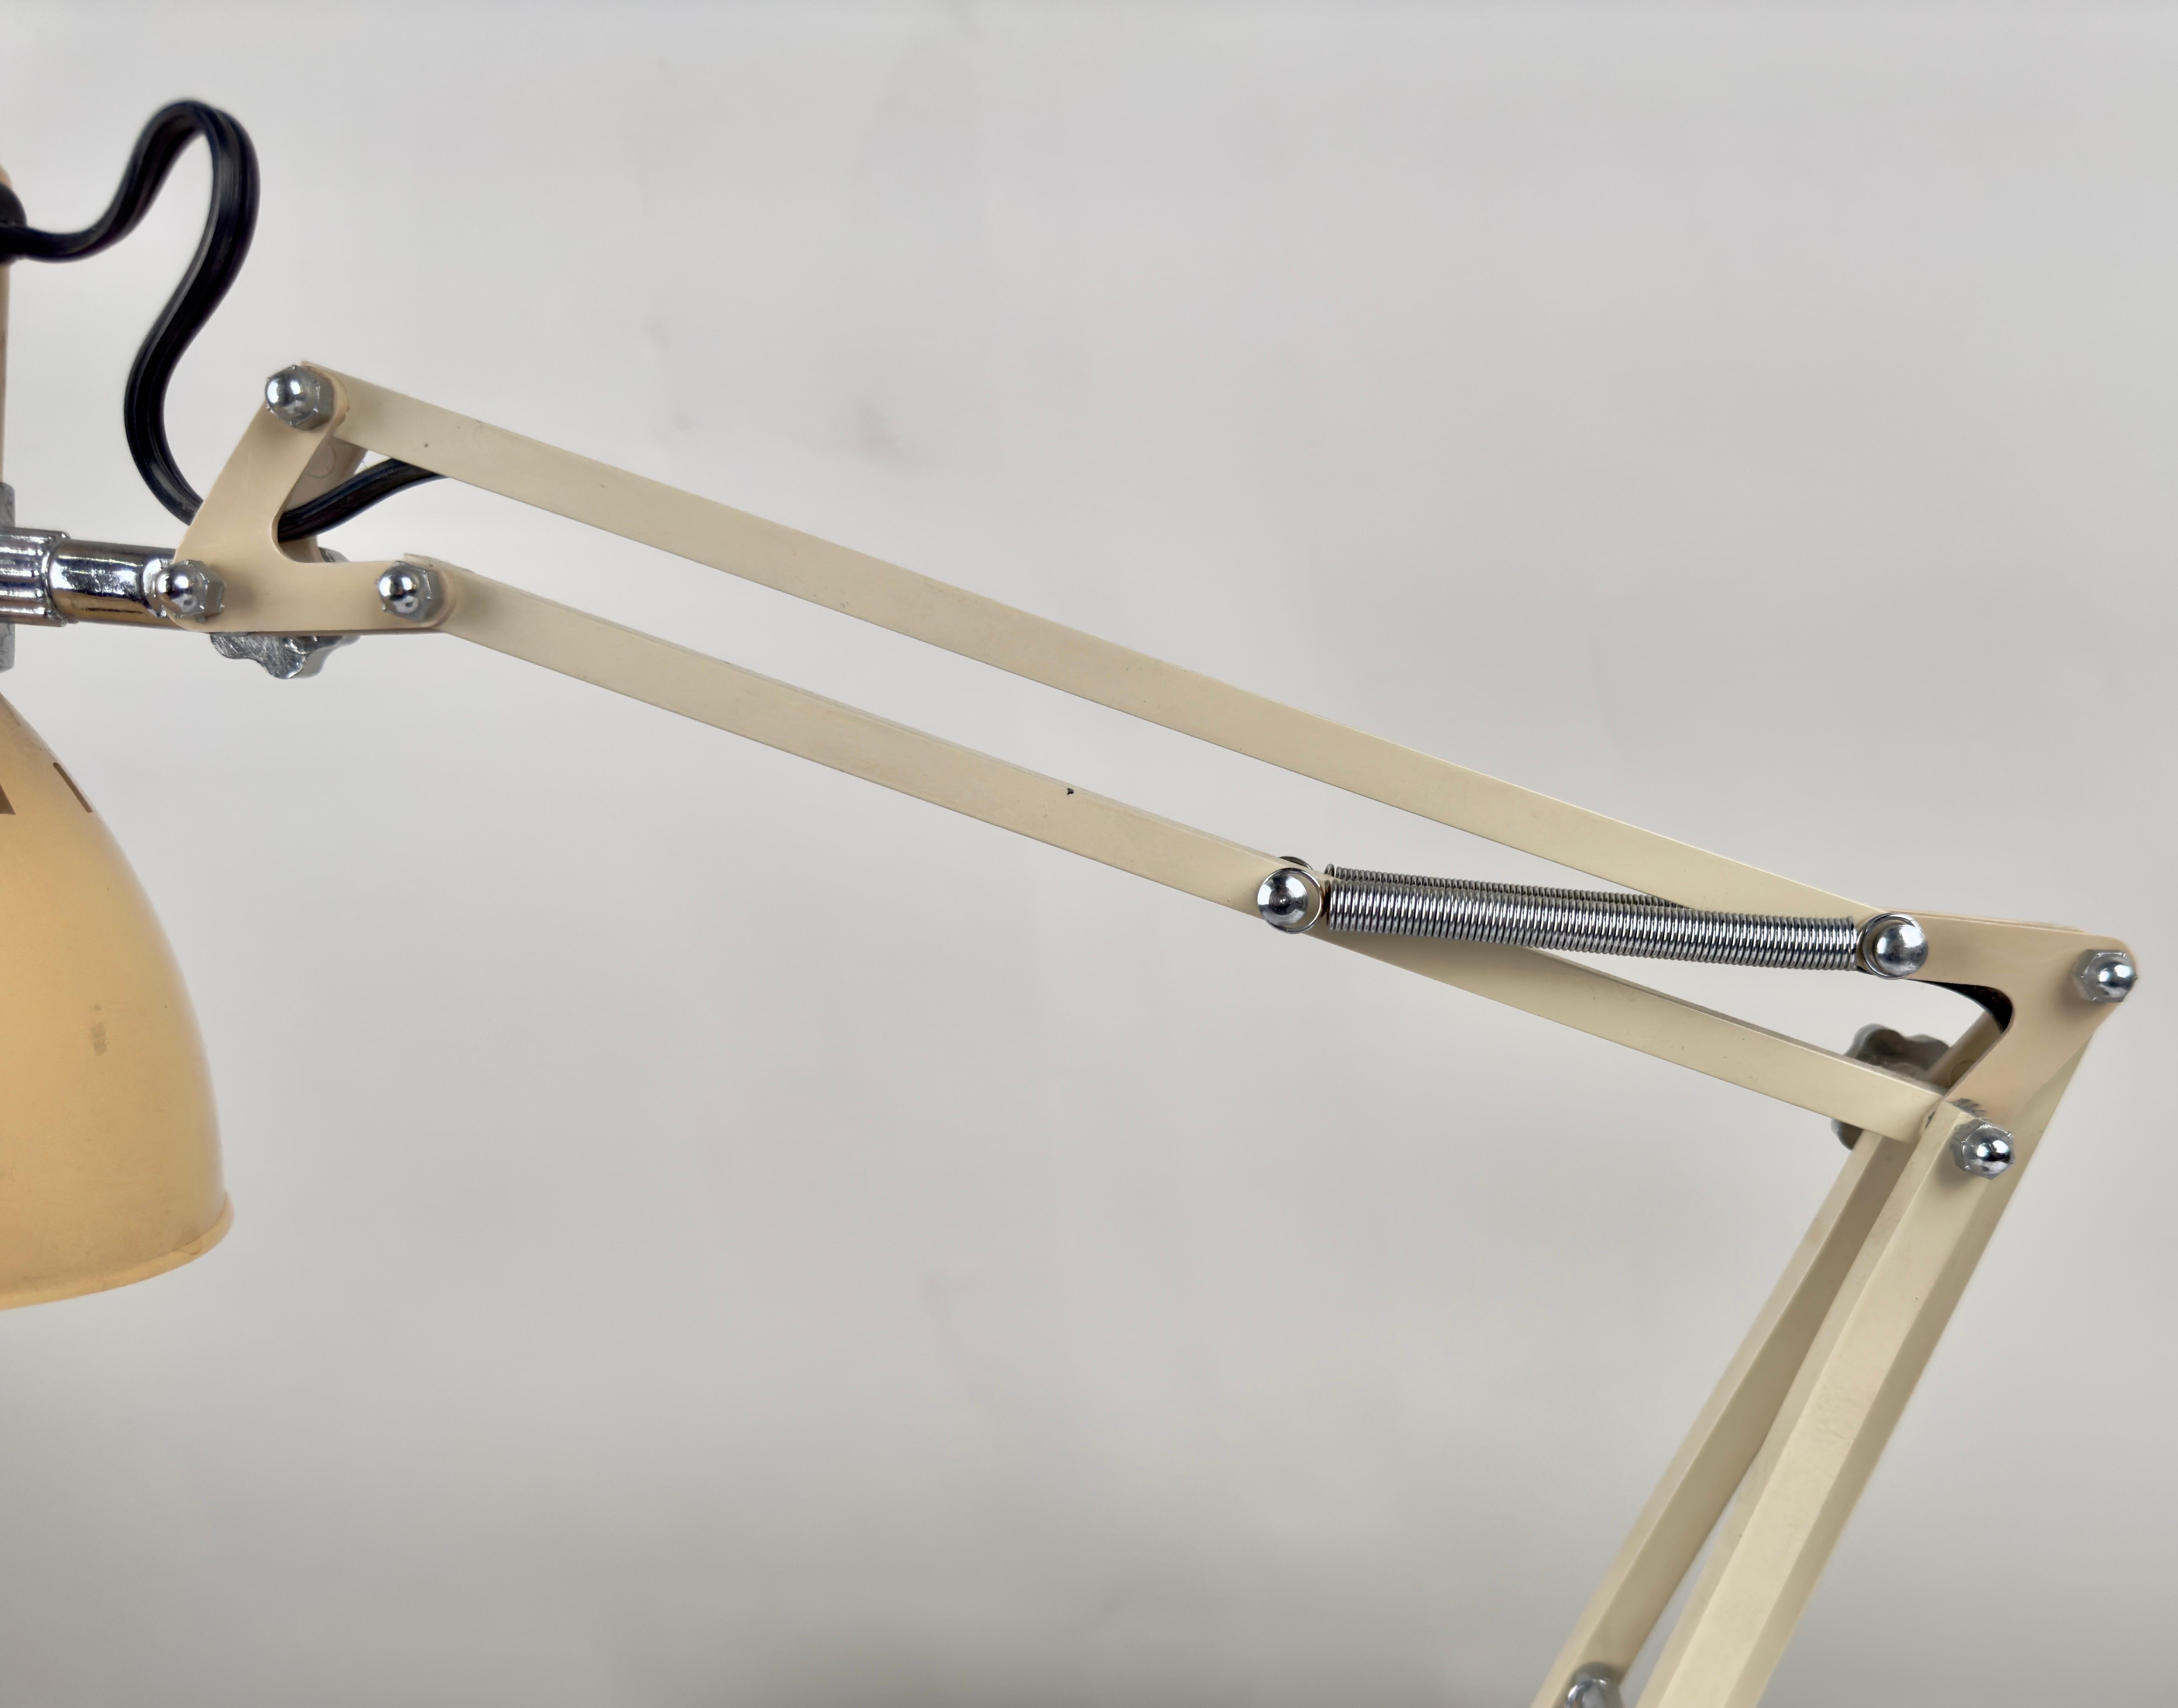 Post- Modern Architects Drafting Desk Lamp in Tan by Electrix, Inc In Good Condition For Sale In Plainview, NY